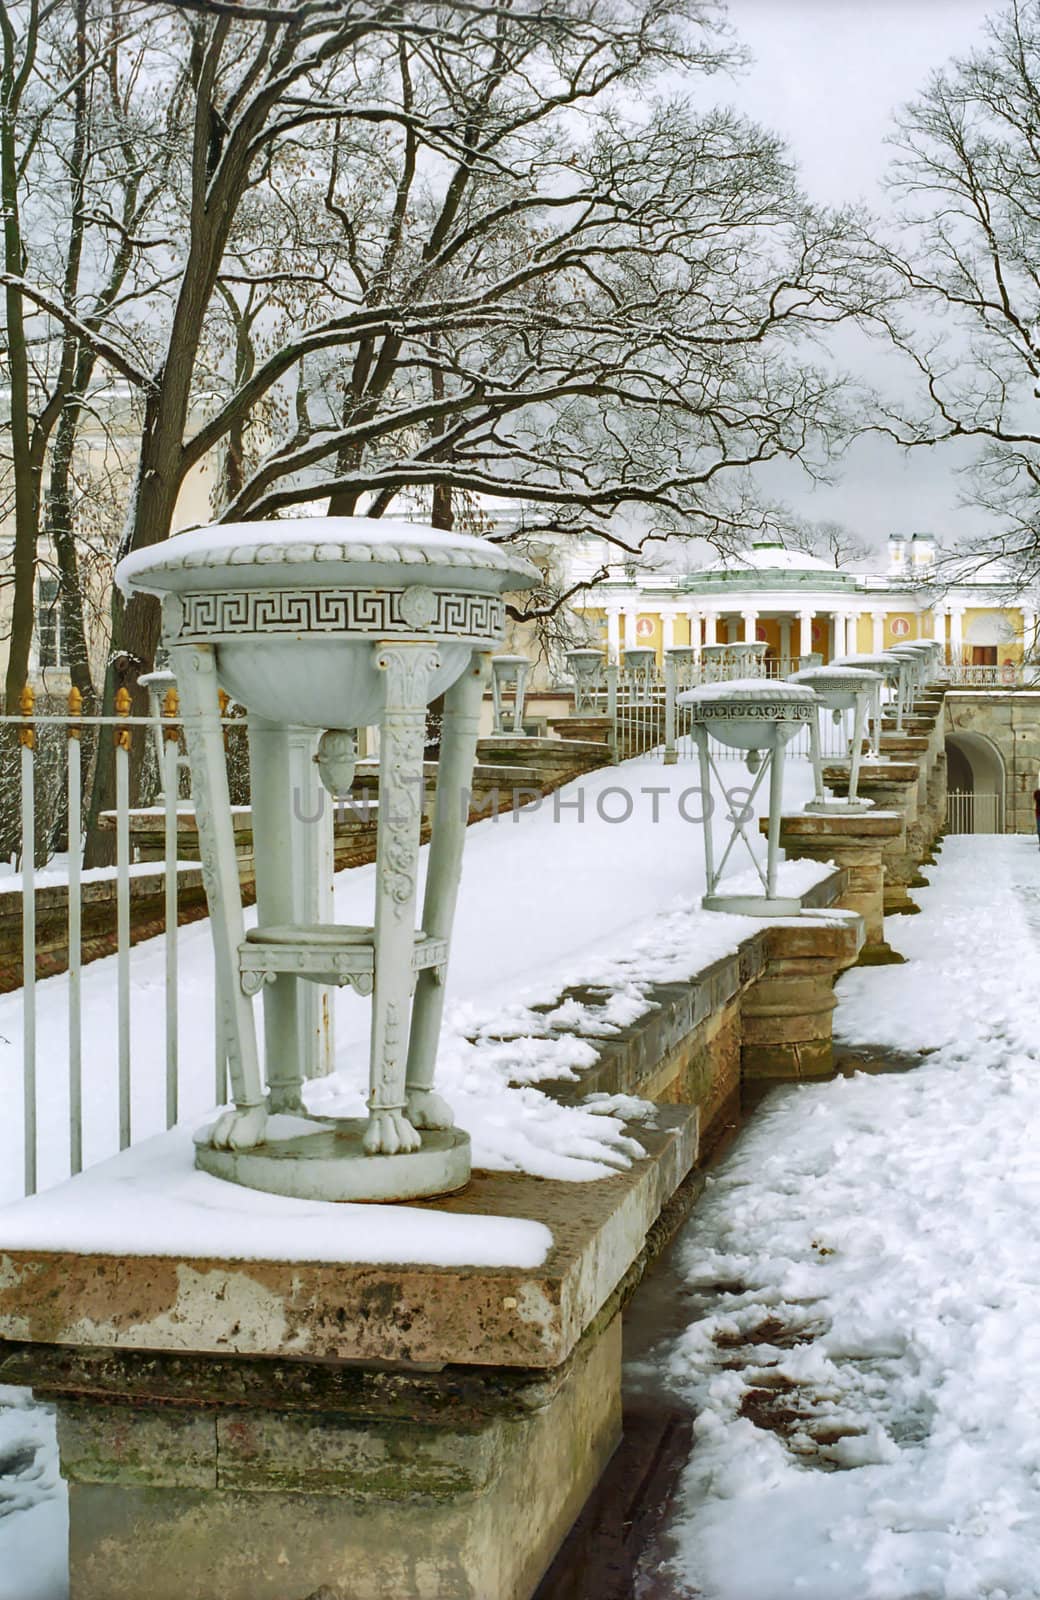 Decor of old building in winter with tripod vase in front